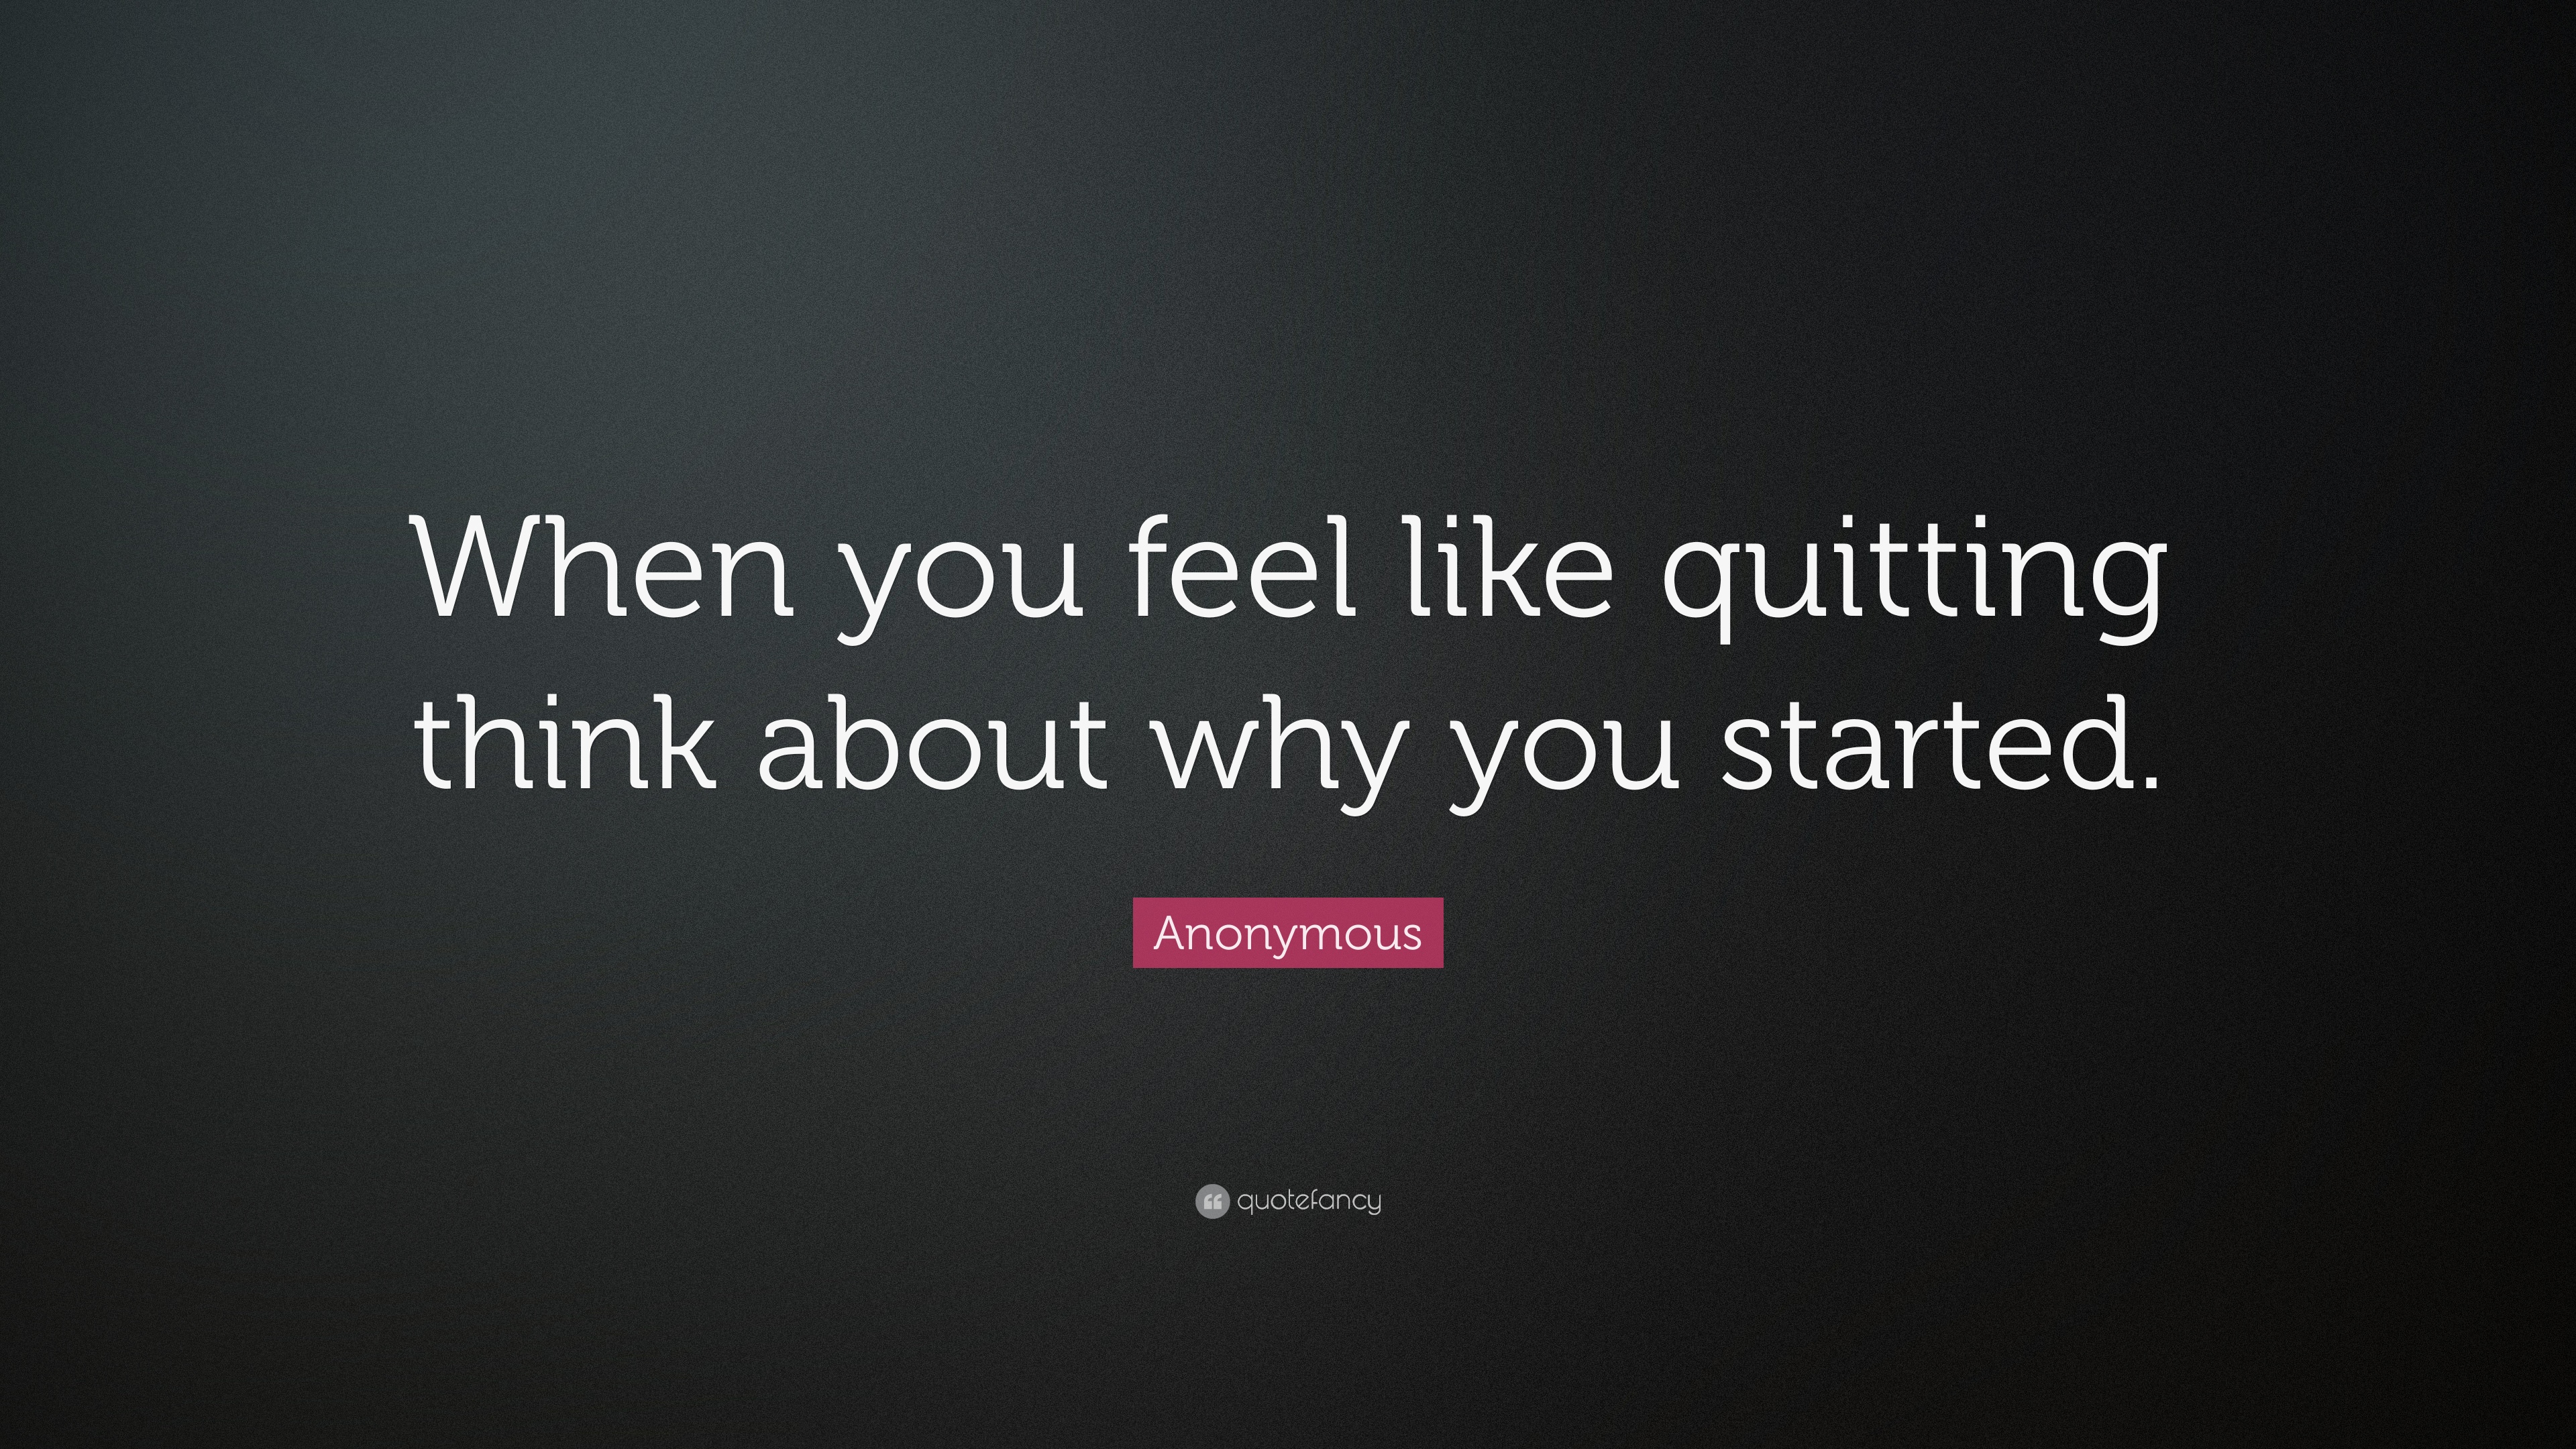 29273-Anonymous-Quote-When-you-feel-like-quitting-think-about-why-you.jpg